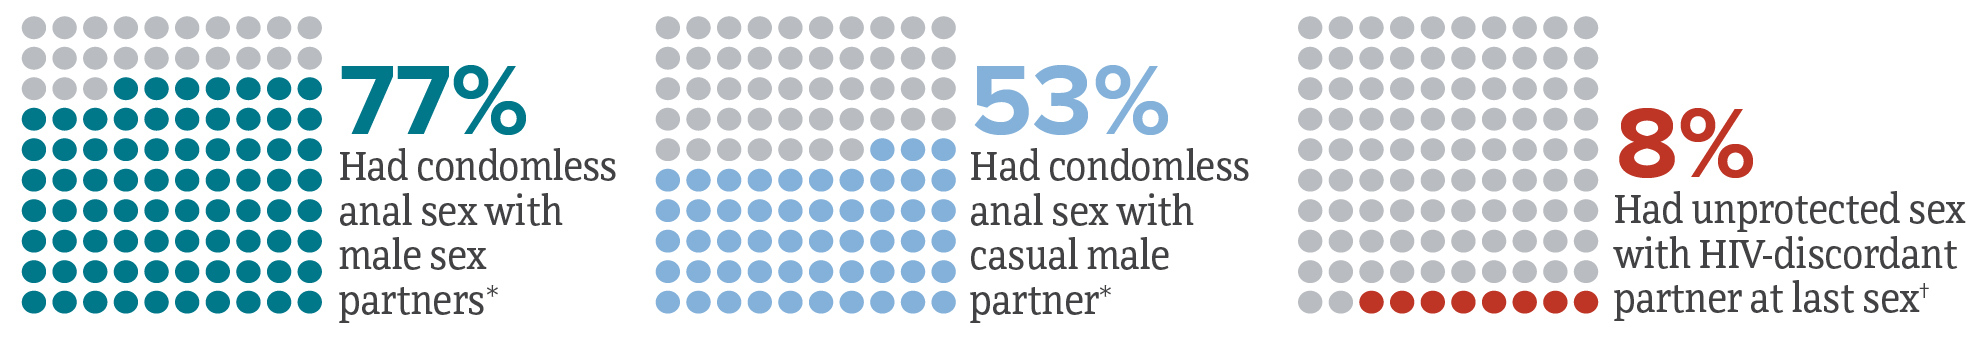 Grid charts show sexual behaviors among men who have sex with men: prevalence of condomless anal sex (77%), condomless anal sex with a casual male partner (53%), and unprotected sex with HIV-discordant partner at last sex (8%).